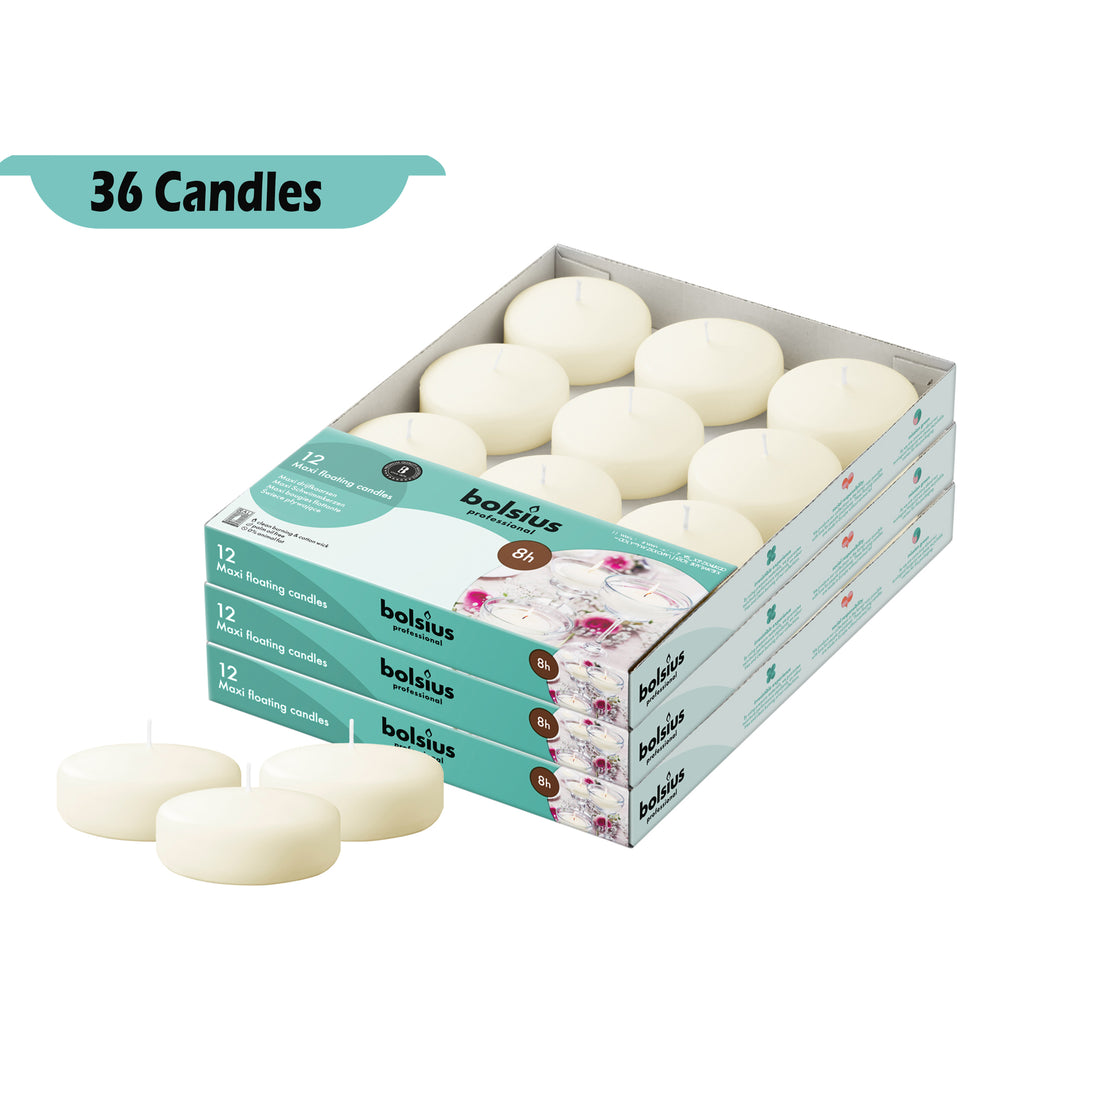 3" X 1" Classic Bulk Floating Candles - 36 Pack